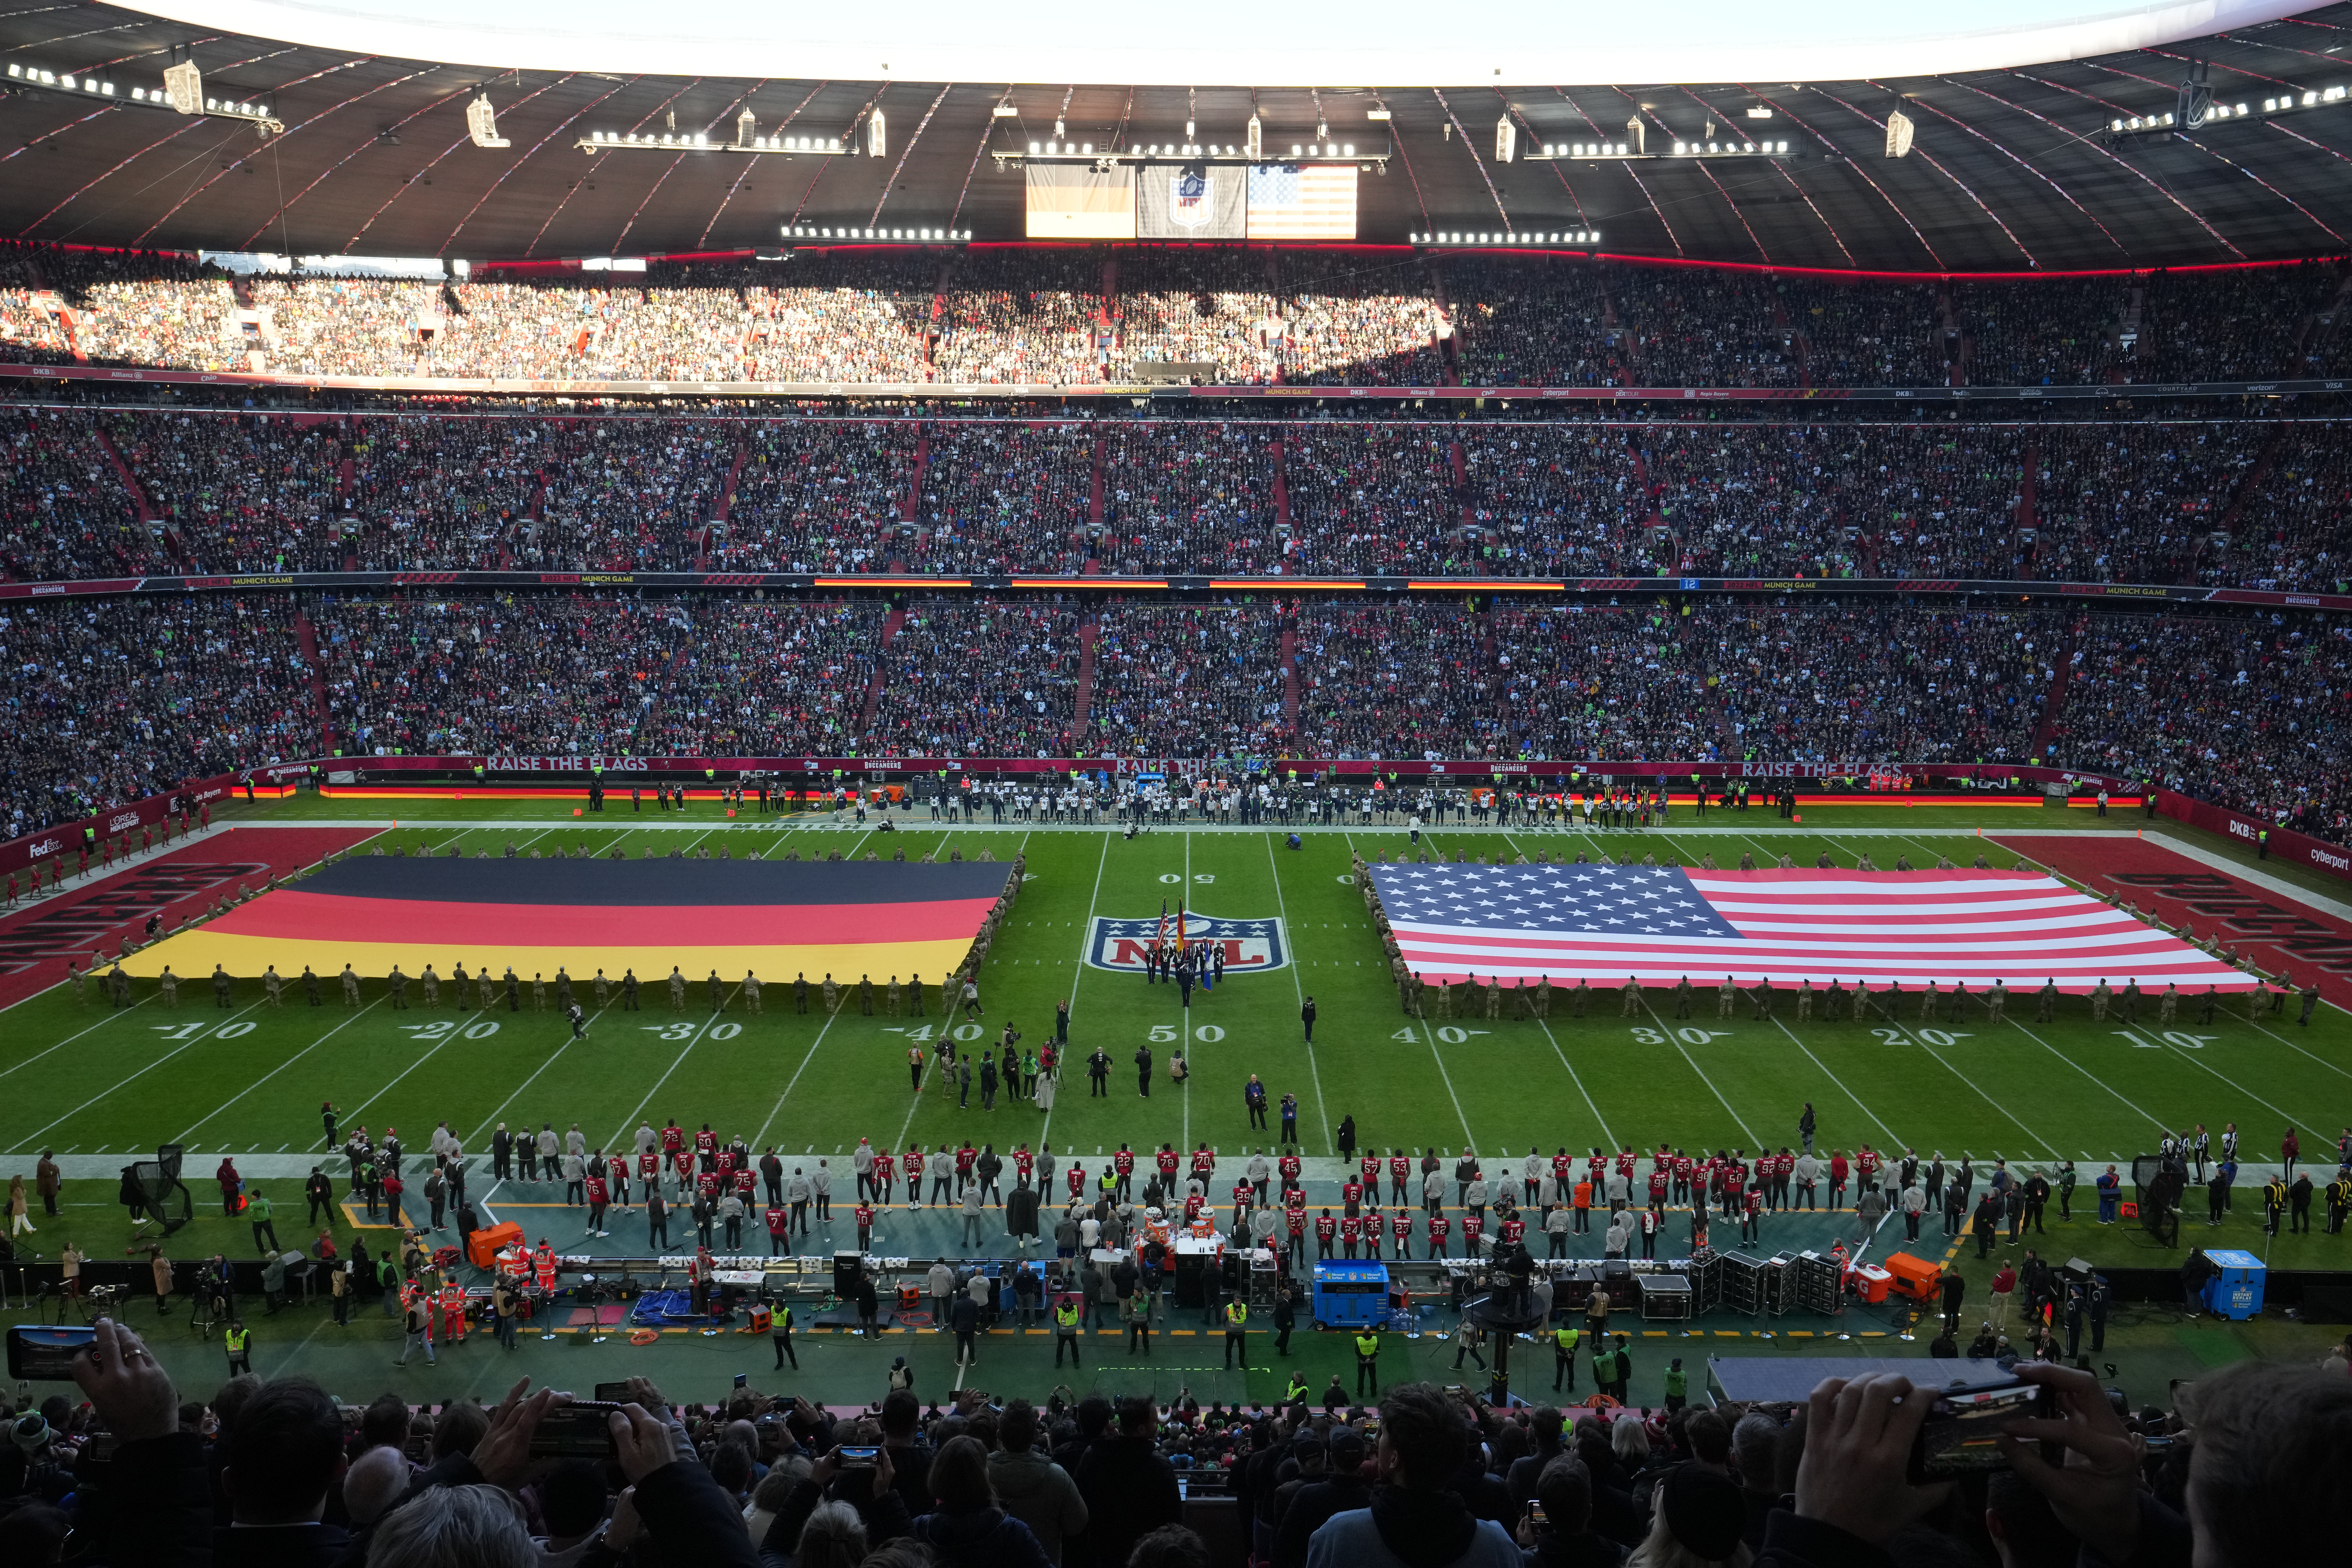 The NFL will play two games in Frankfurt stadium in 2023-24.